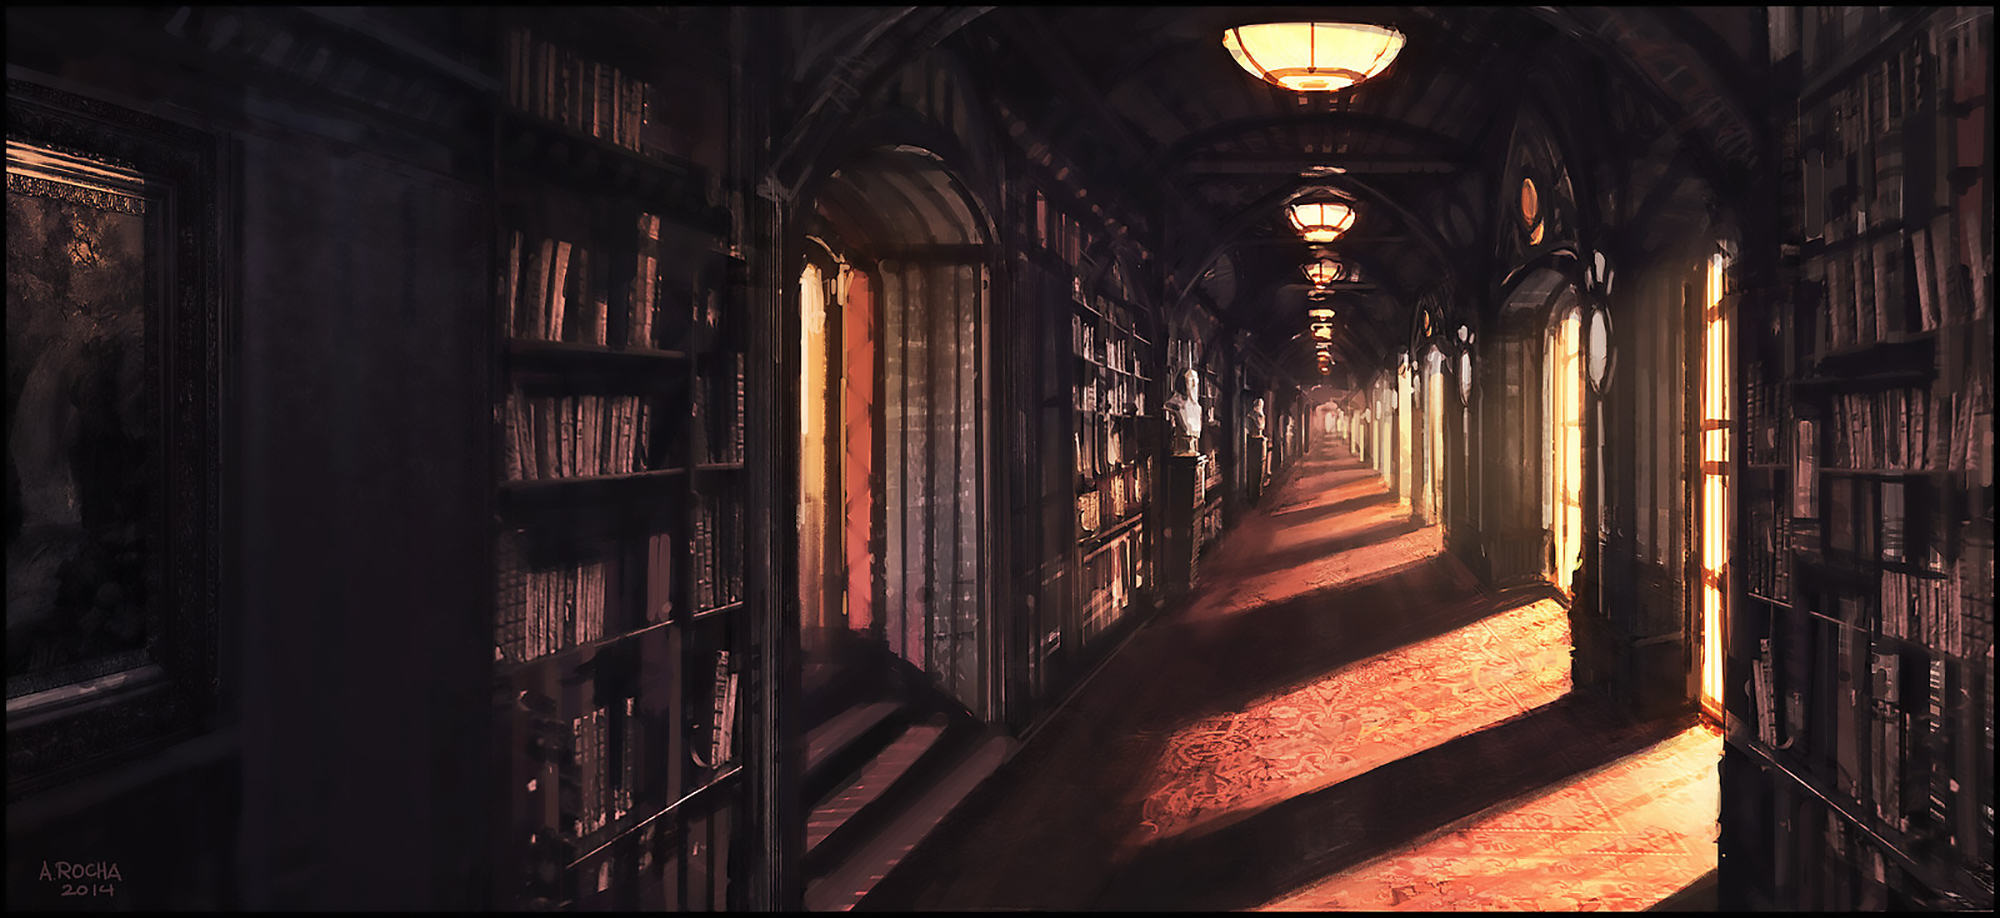 Fantasy Library HD Wallpaper | Background Image